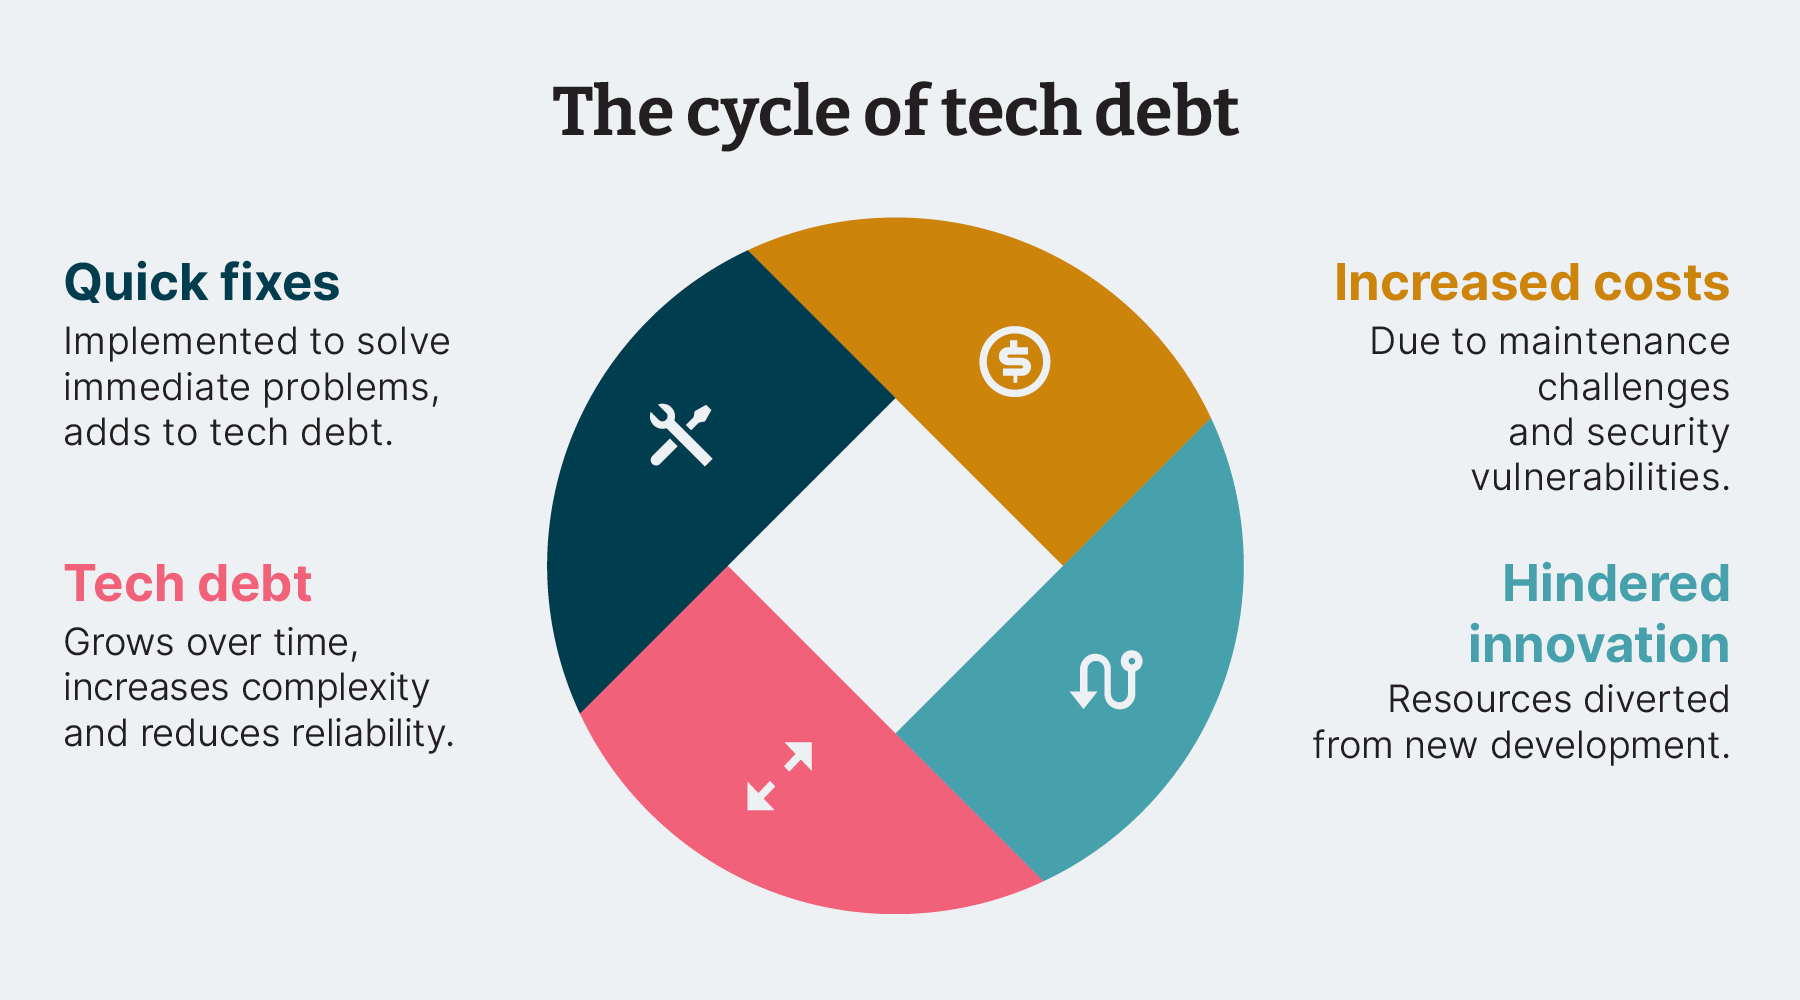 The cycle of tech debt: Quick fixes, increased costs, hindered innovation and Tech debt.